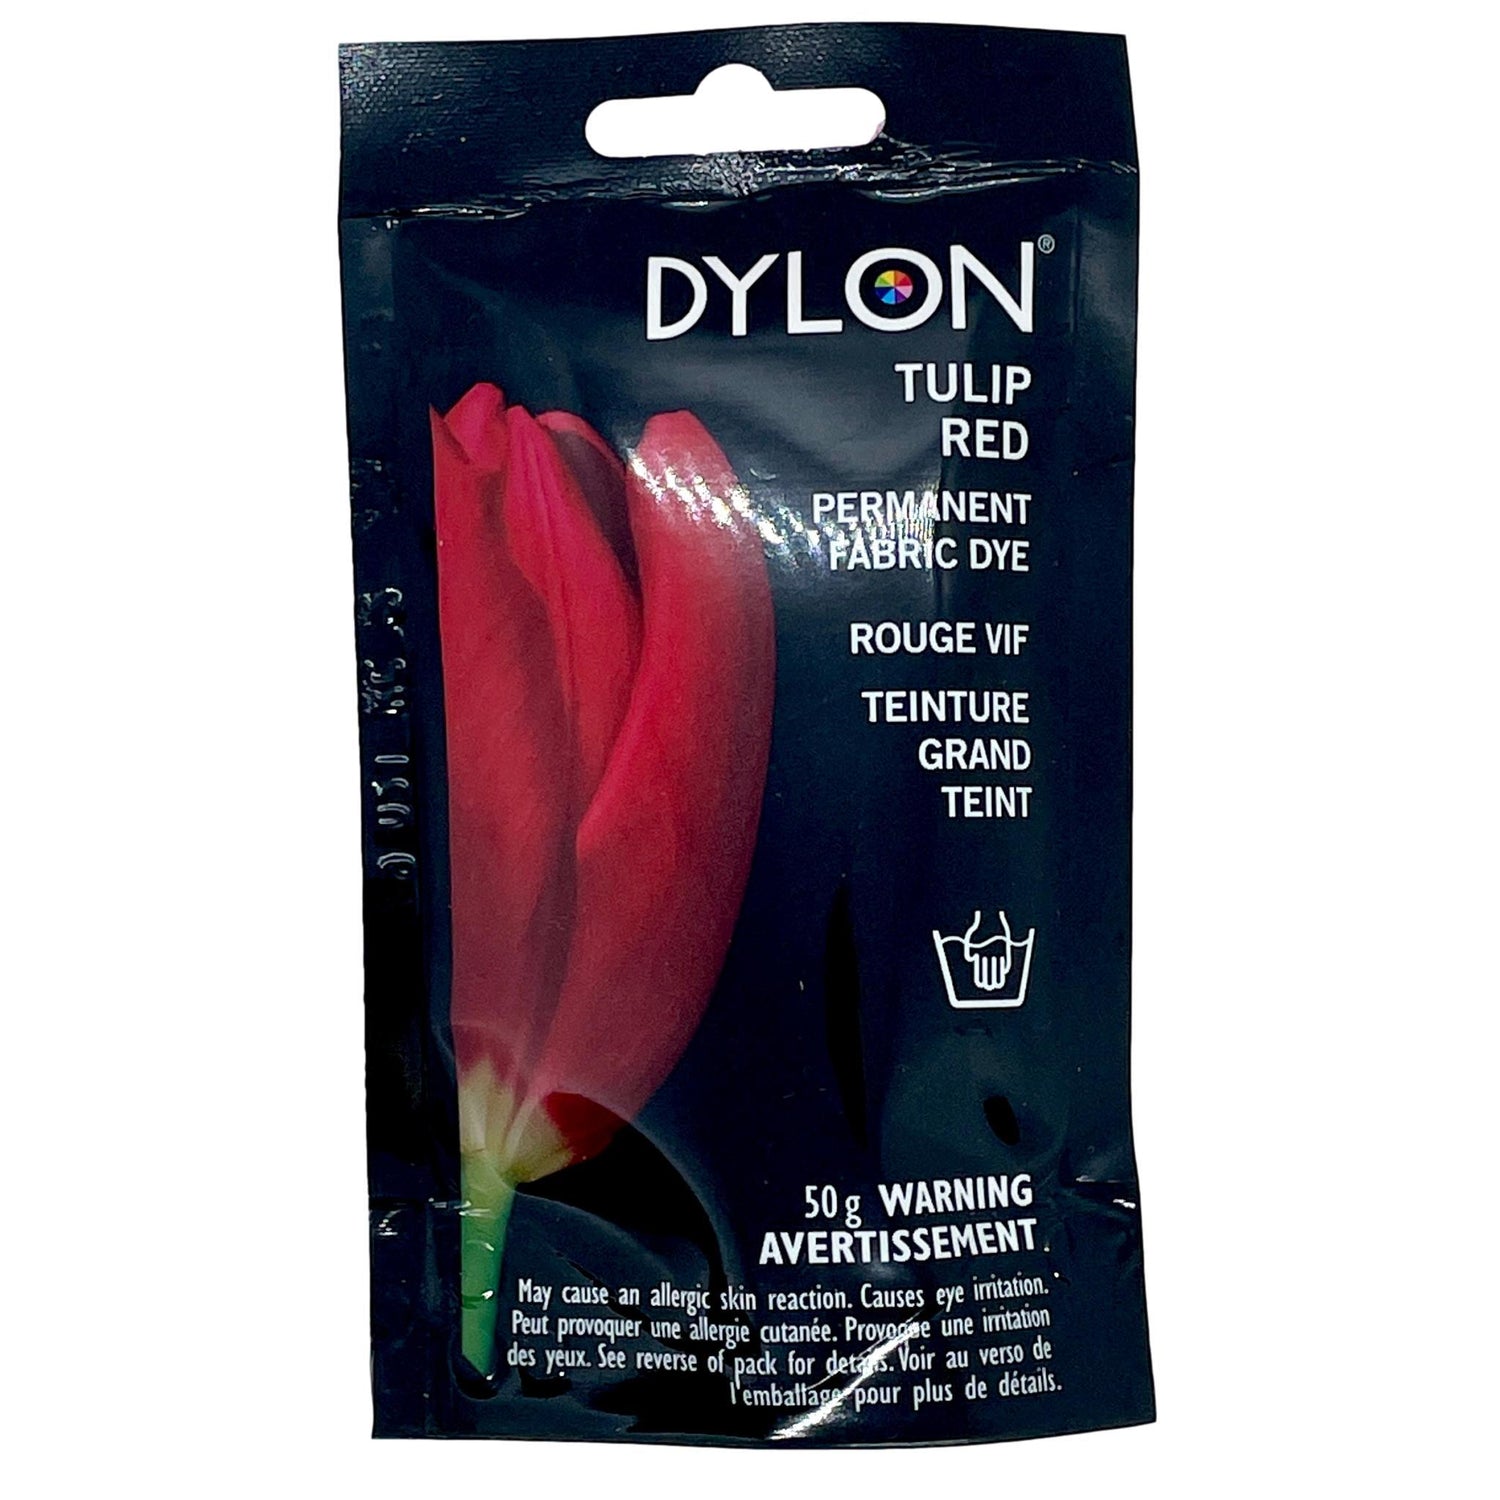 Dylon Multi-purpose Fabric Dye single or Packs of 6 free UK Delivery -   Norway